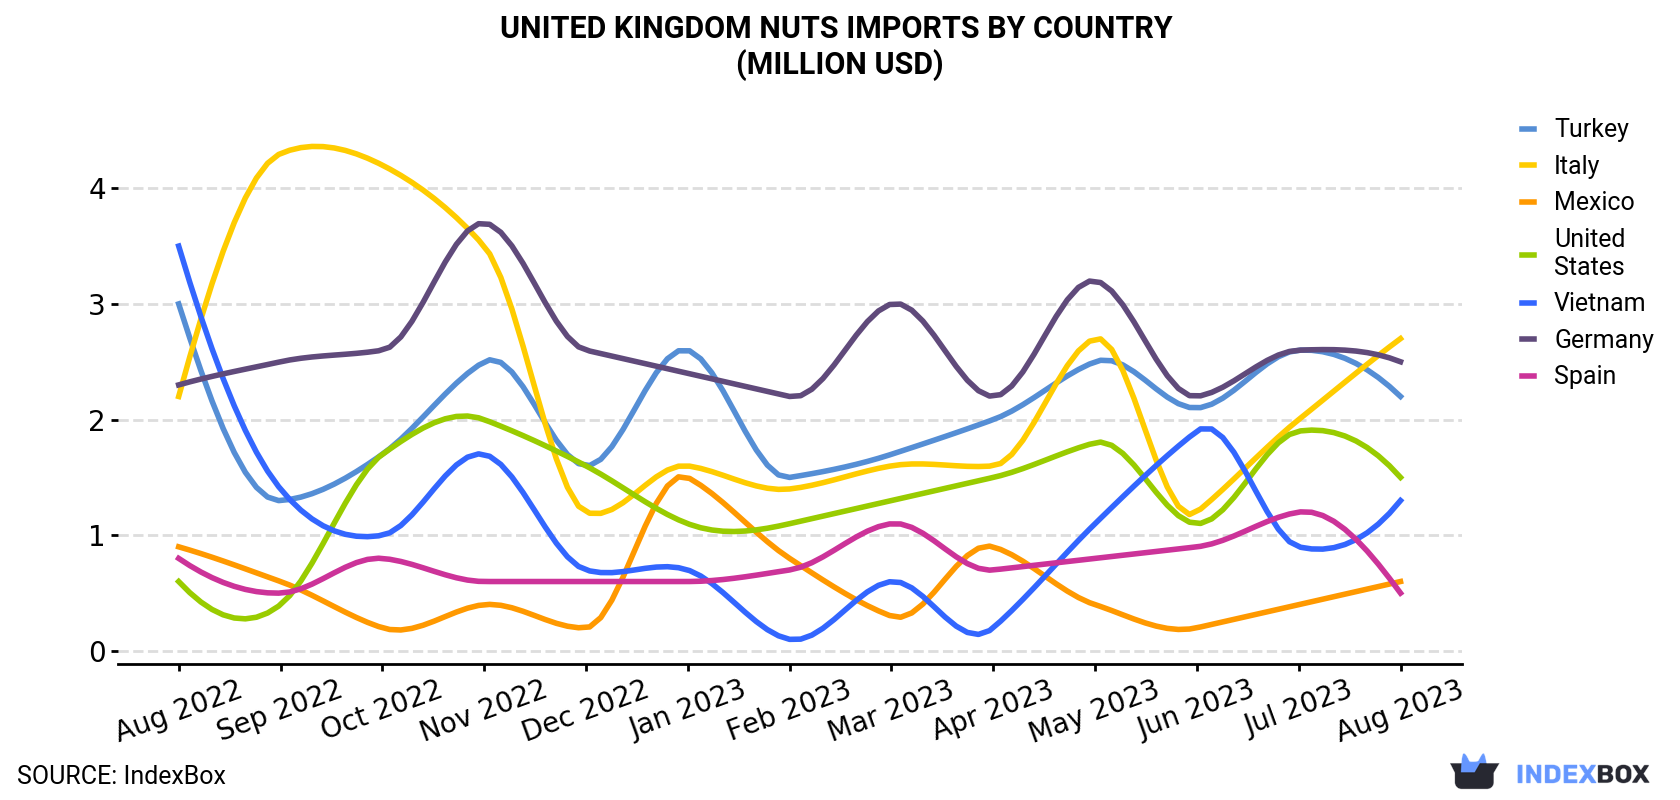 United Kingdom Nuts Imports By Country (Million USD)